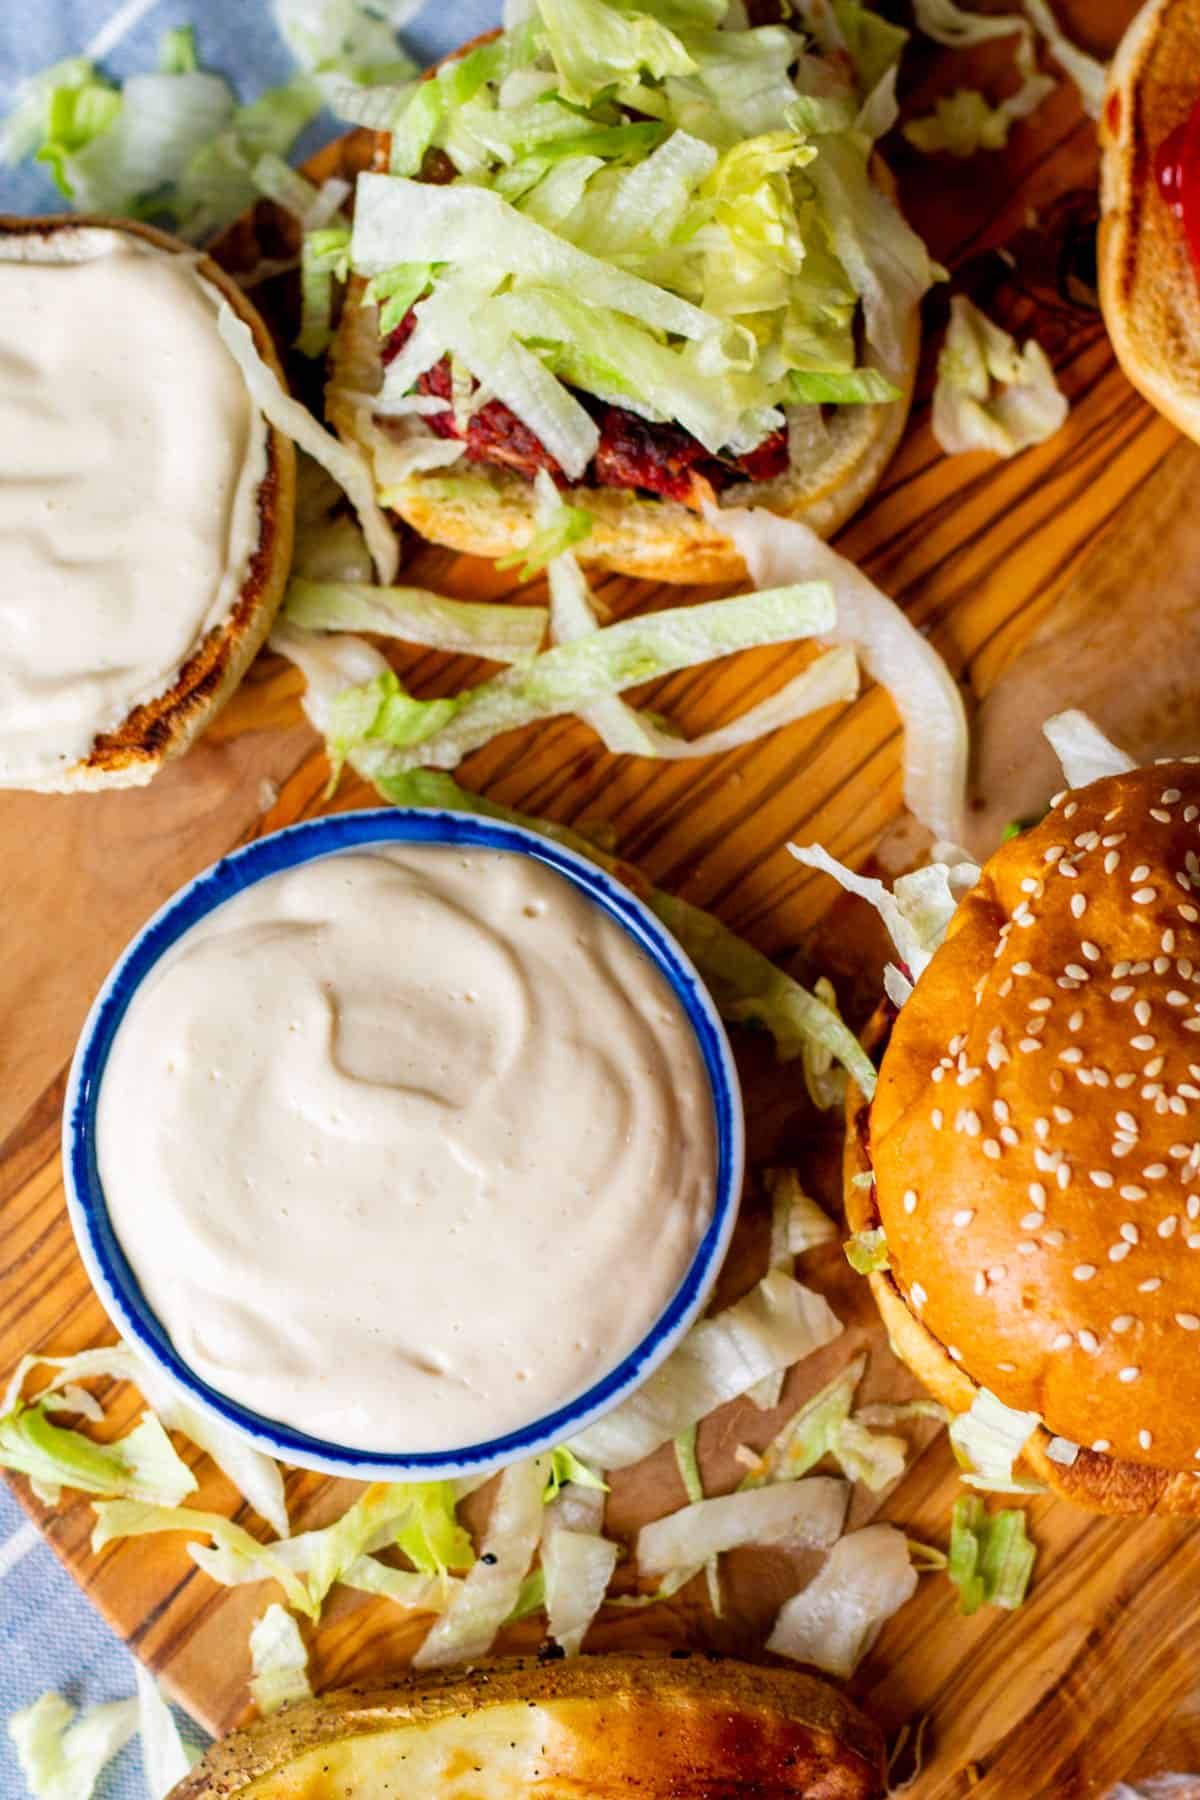 veggie burgers with vegan cashew tofu mayo spread on buns and in bowl over wooden board